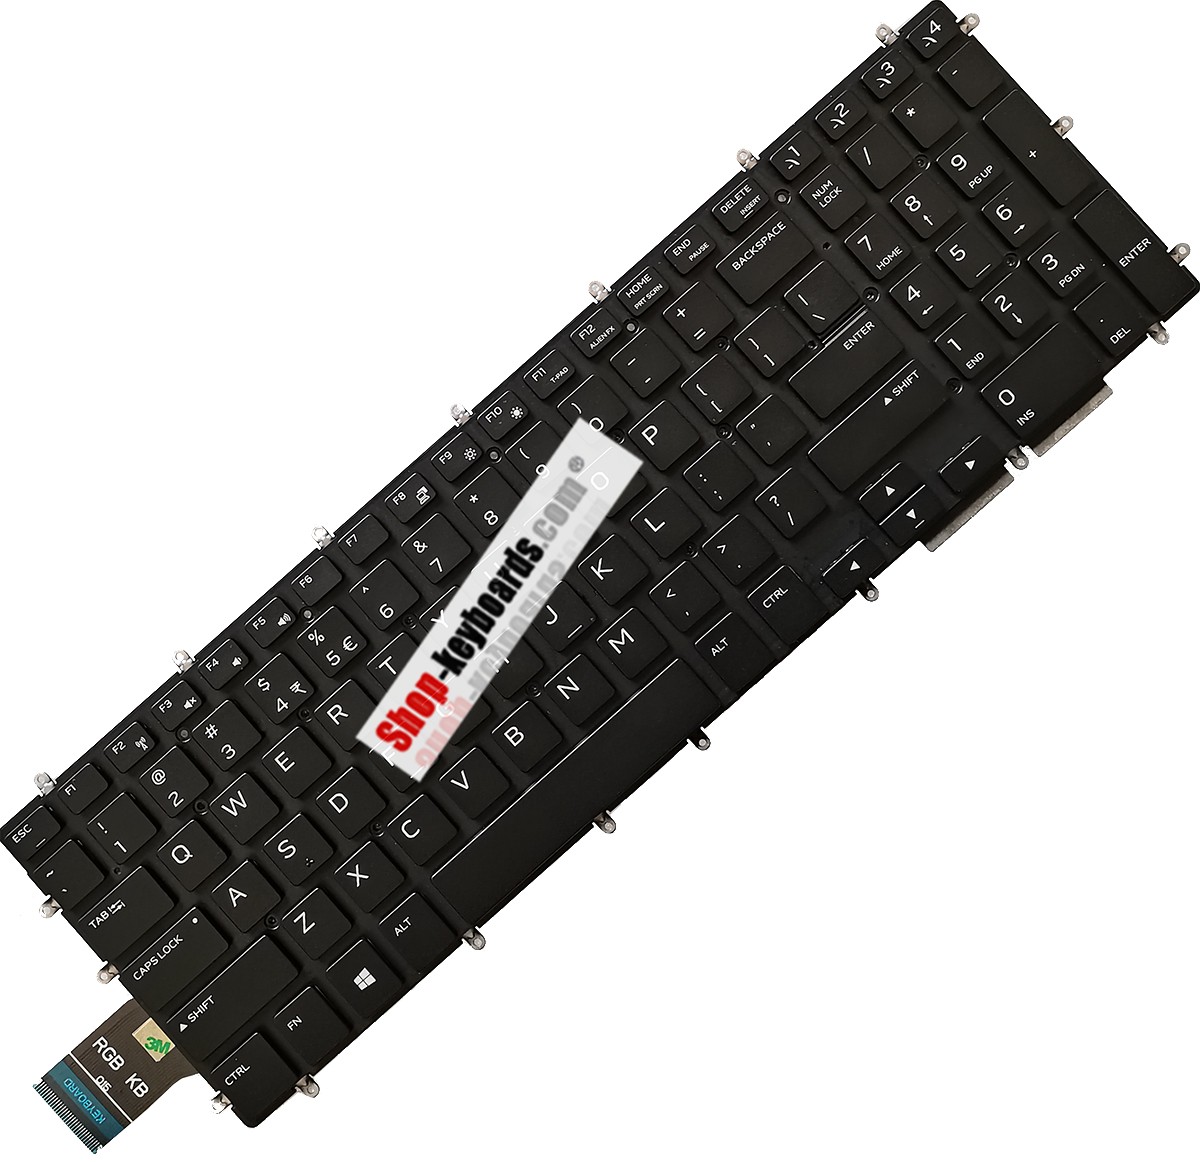 Dell M15-8307 Keyboard replacement